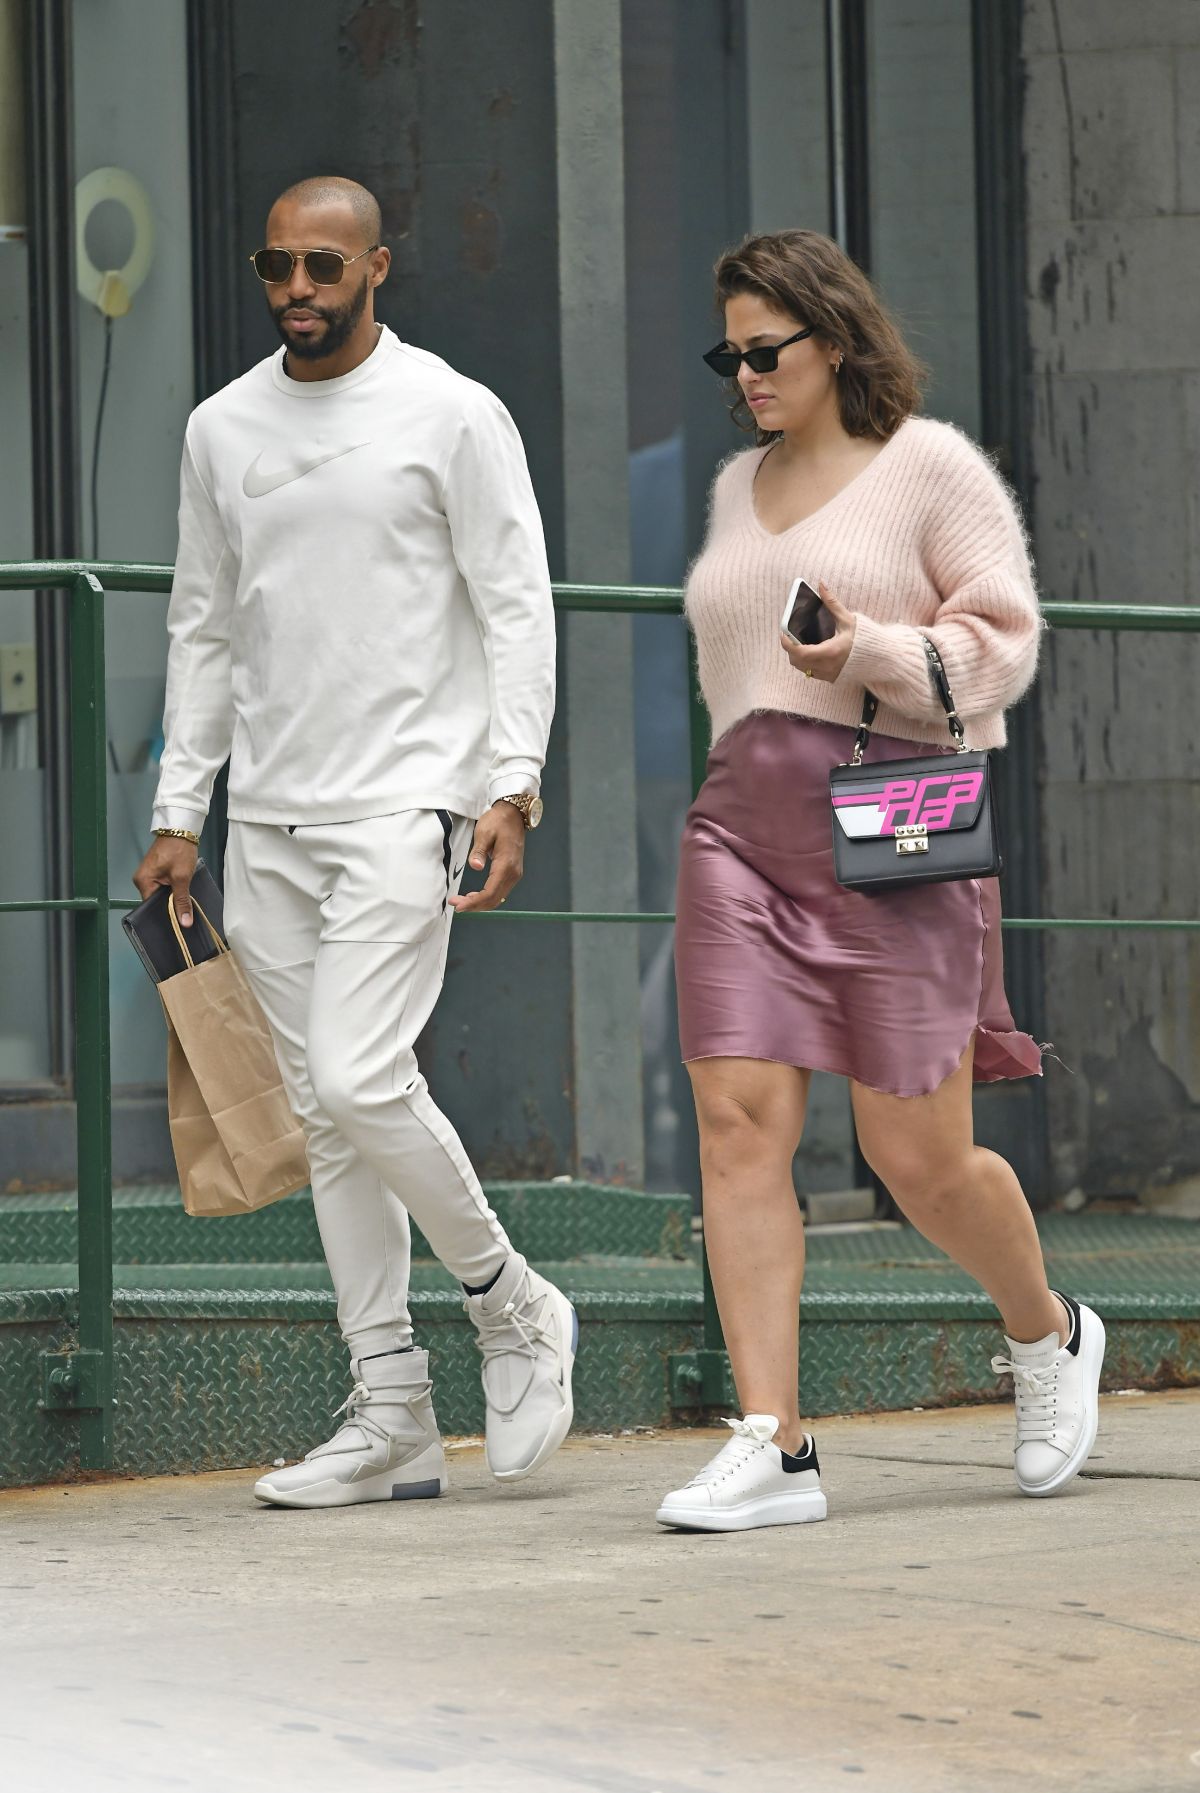 ashley-graham-and-justin-ervin-out-in-new-york-04-14-2019-2.jpg